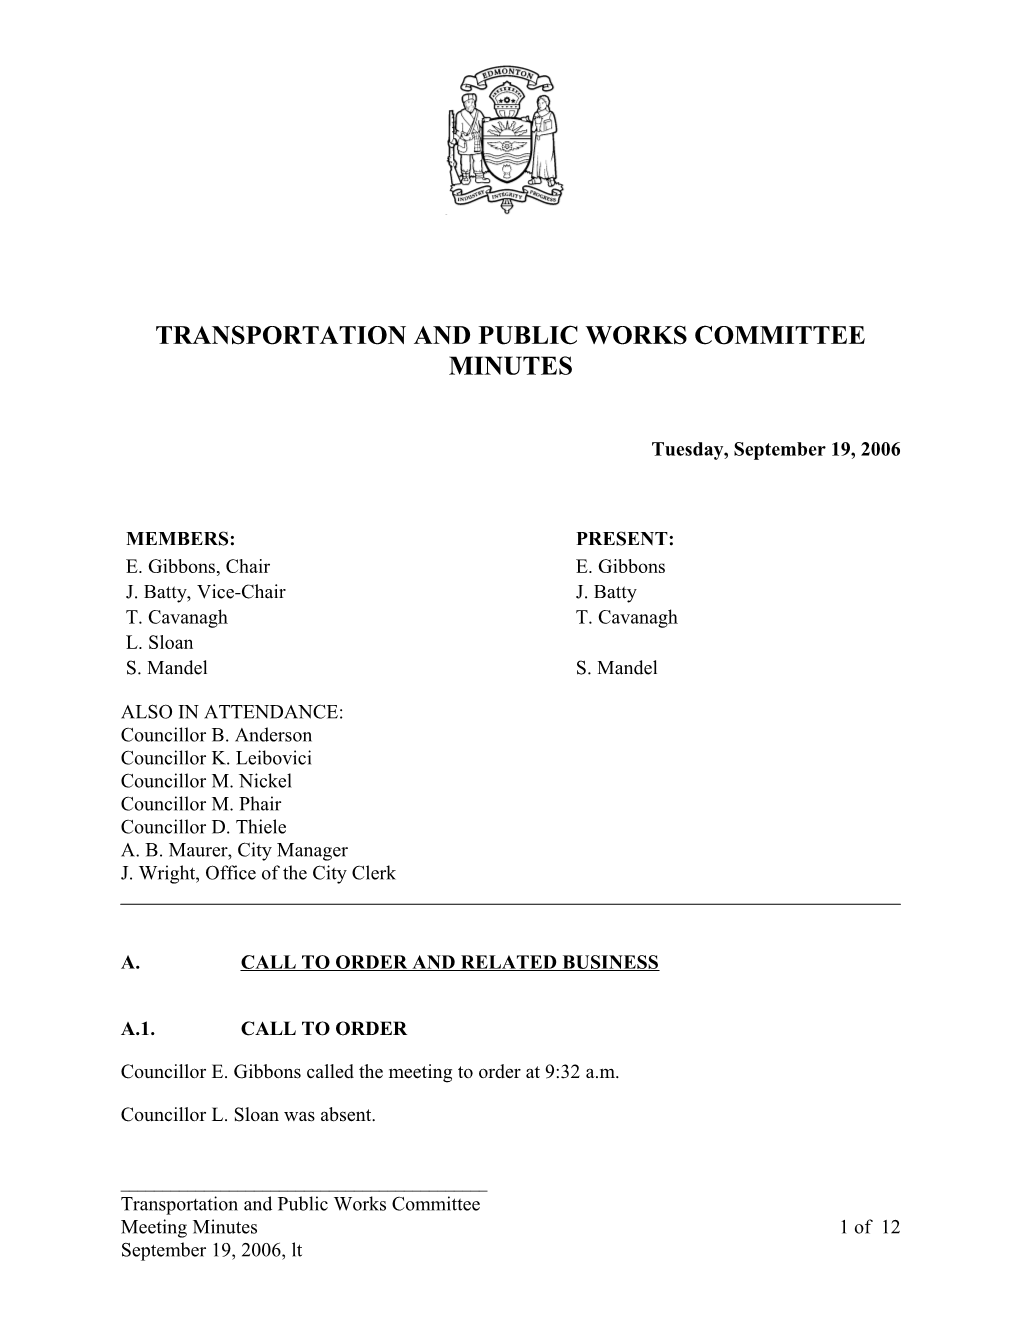 Minutes for Transportation and Public Works Committee September 19, 2006 Meeting